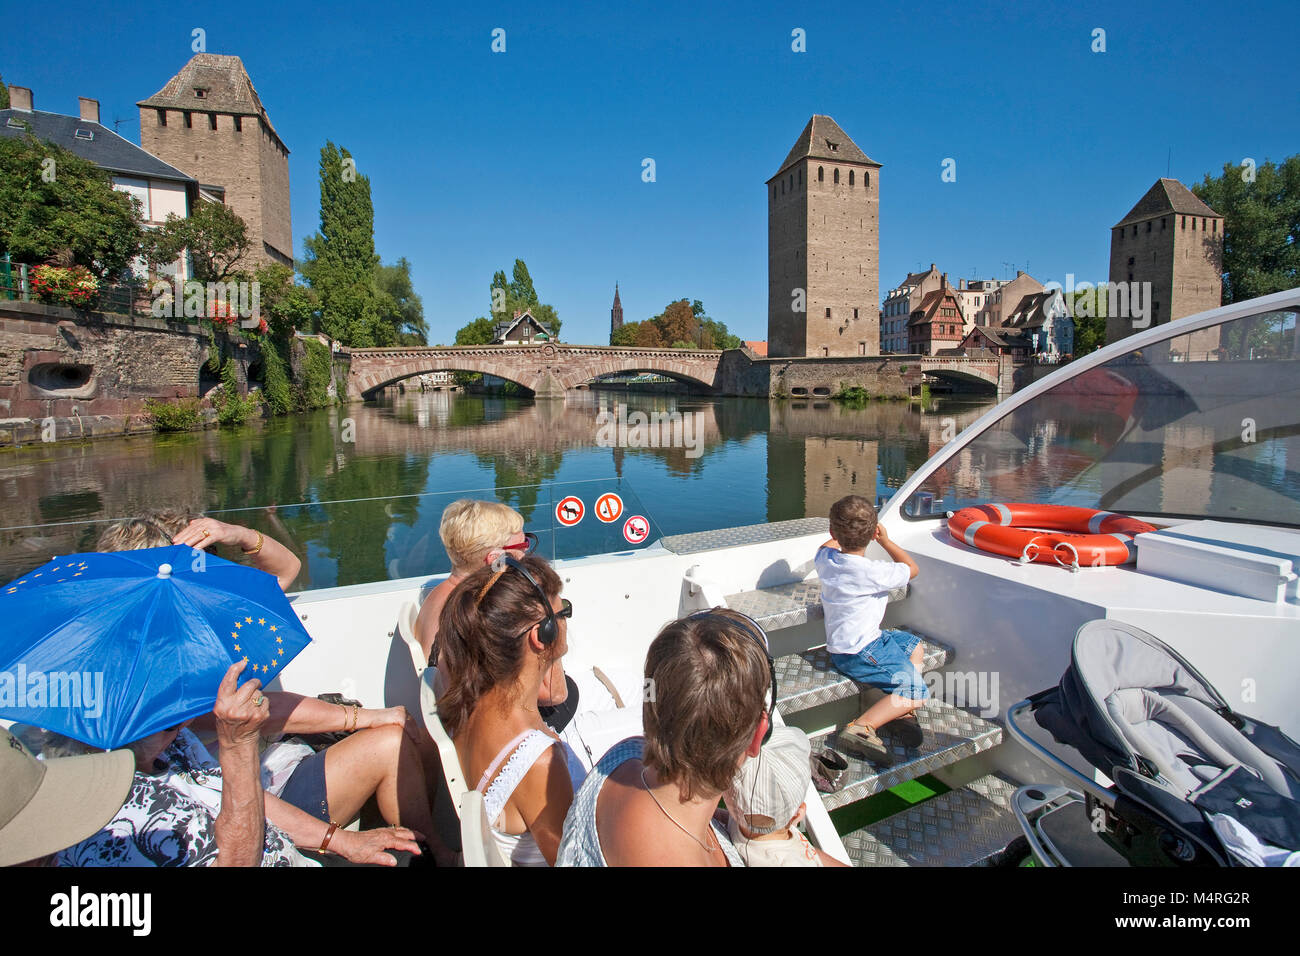 Tourist enjoys the view from excursion boat on Ponts couvert, medieval bridge at La Petite France, Strasbourg, Alsace, Bas-Rhin, France, Europe Stock Photo